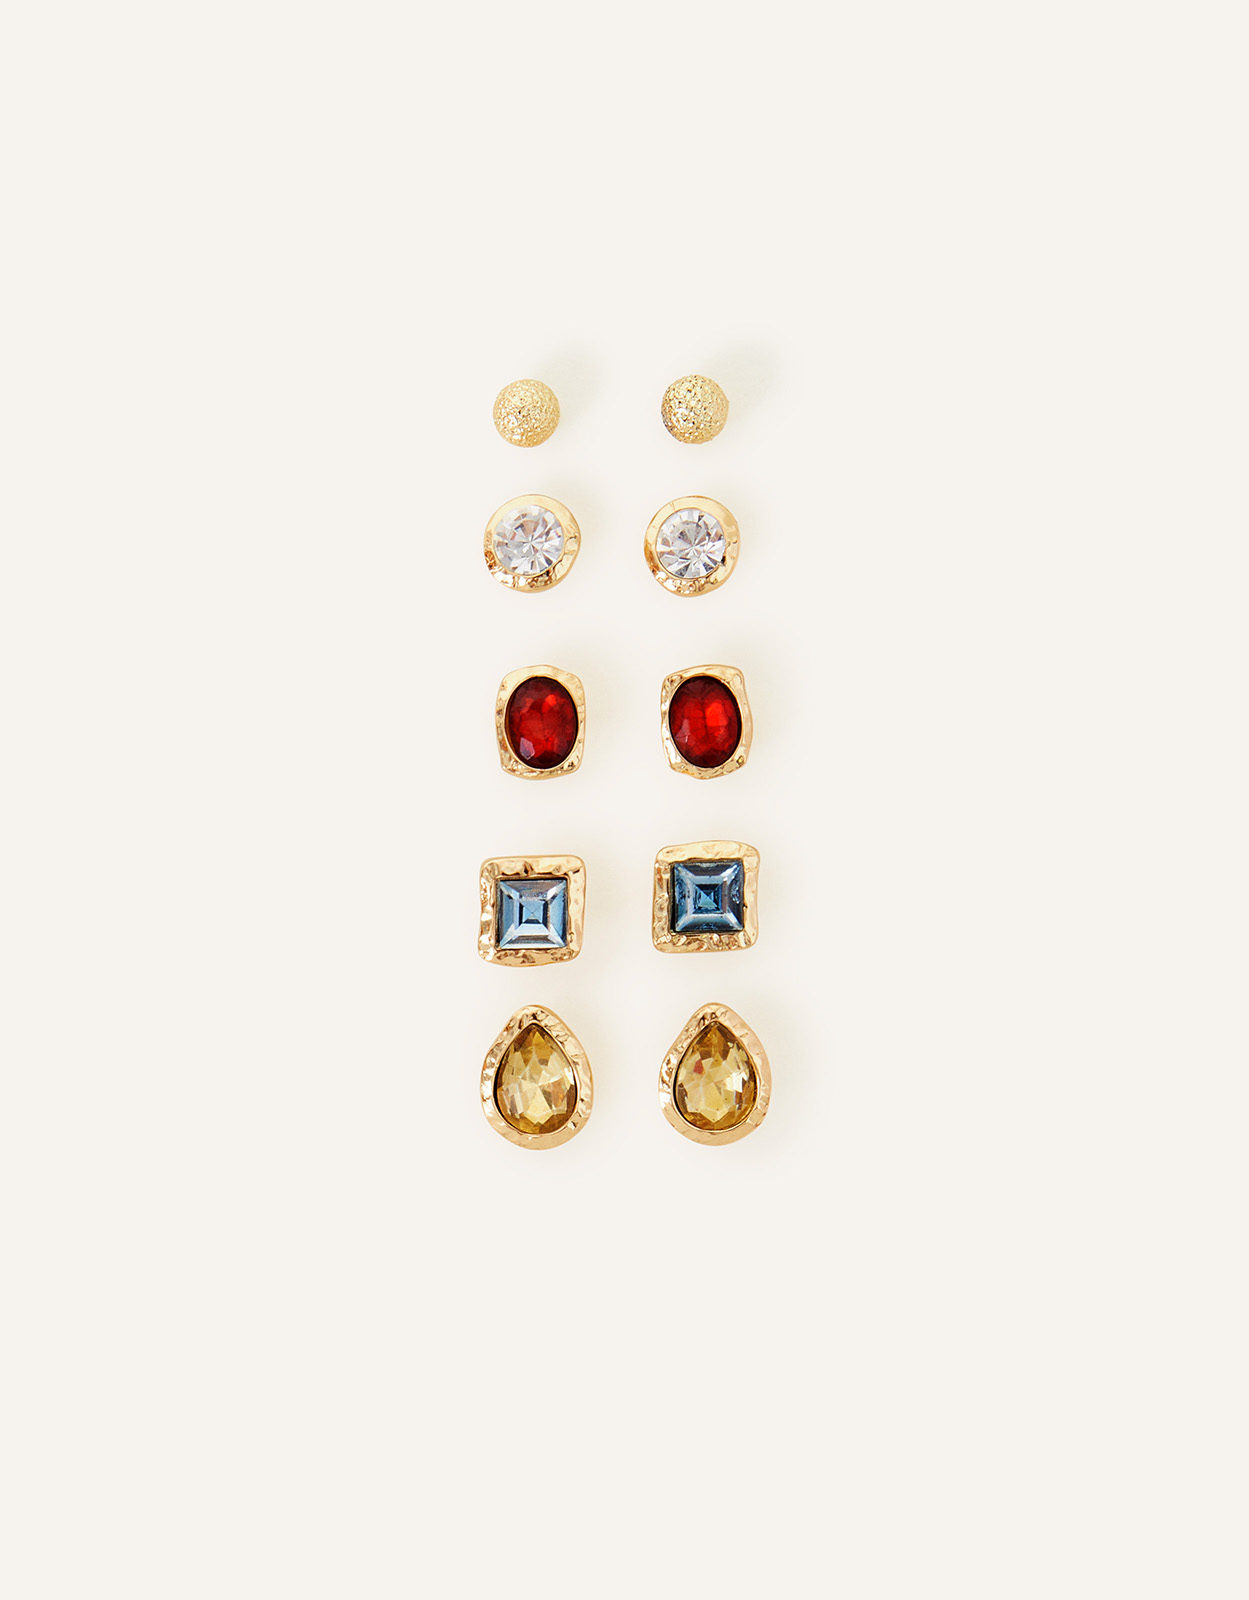 Accessorize Women's Gold, Red and Yellow Pack of 5 Gem Stud Earrings, Size: One Size